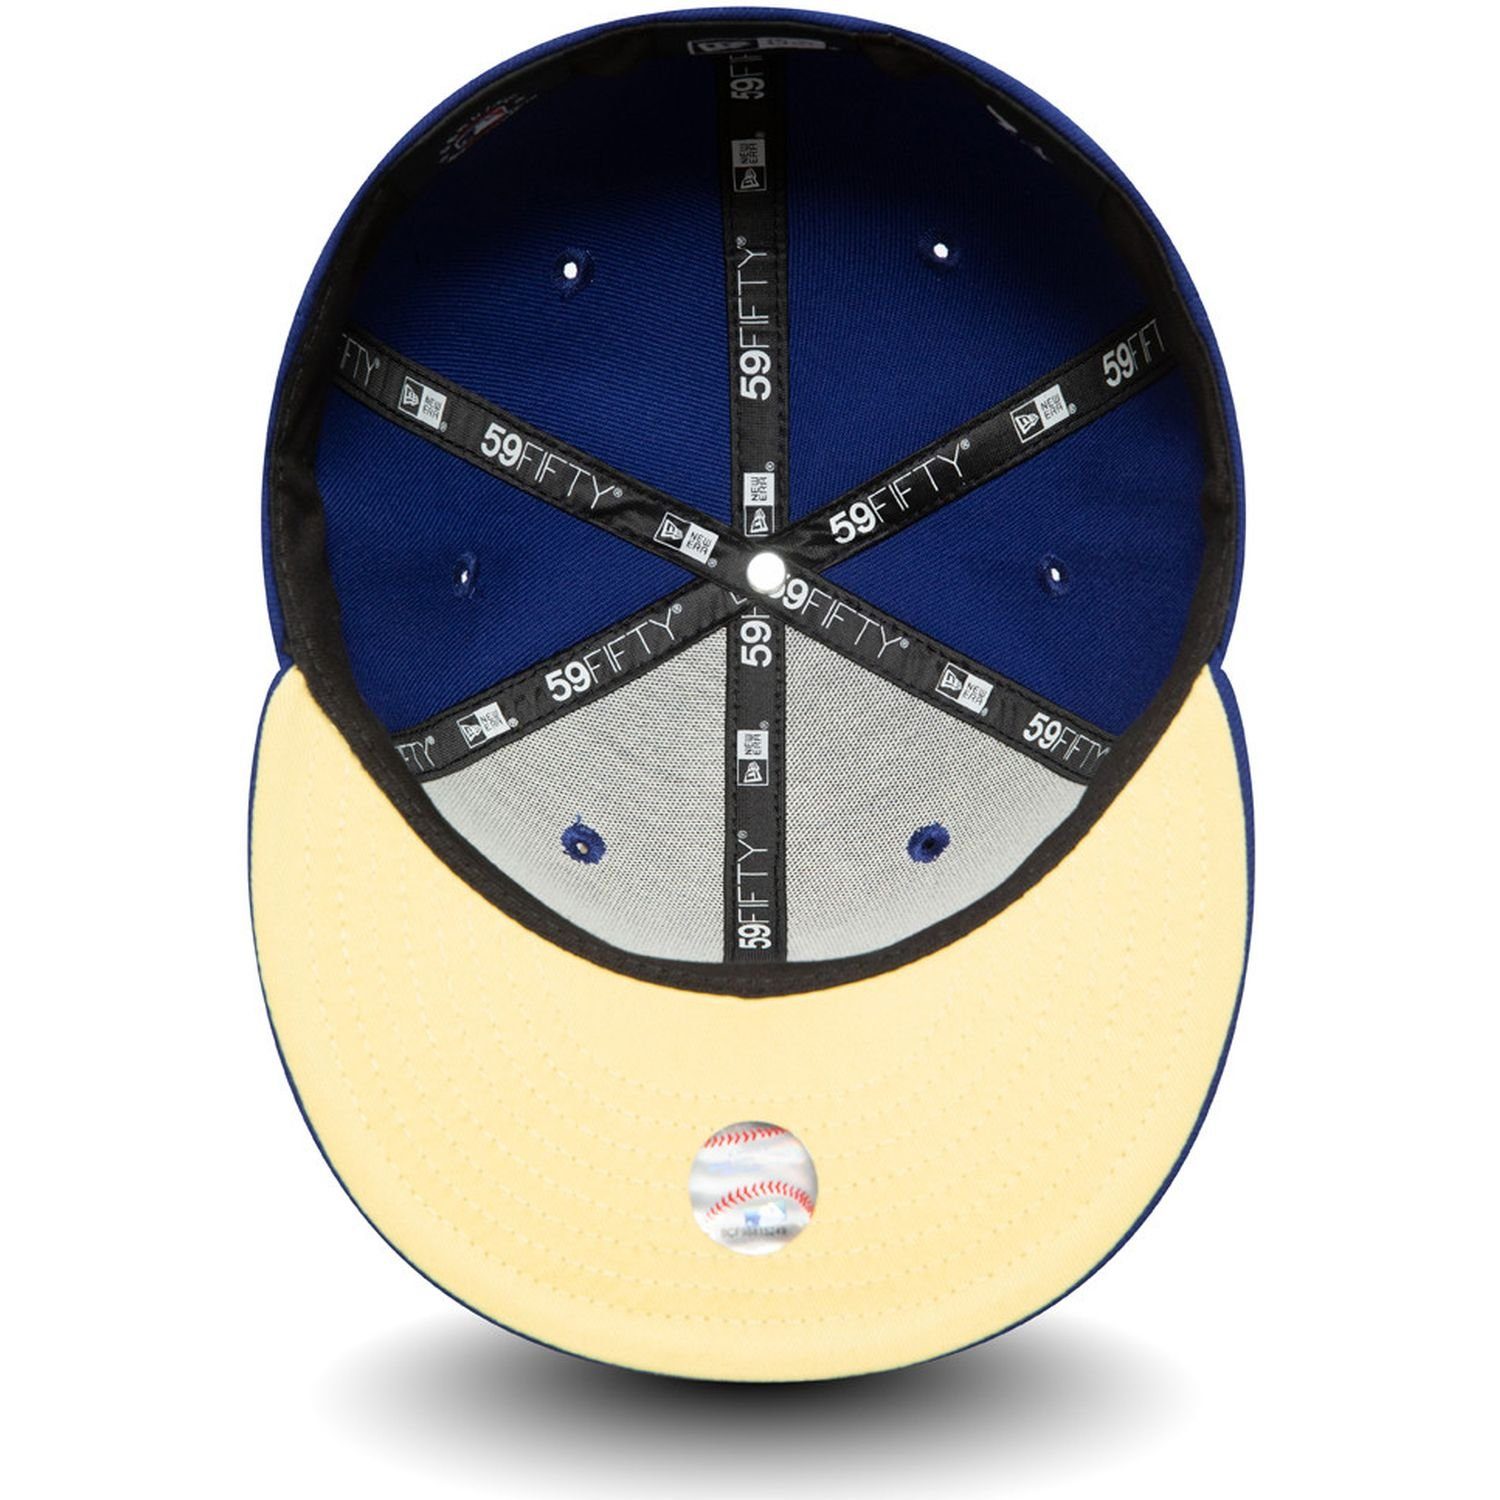 Fitted Los New Dodgers 59Fifty Era Cap Angeles